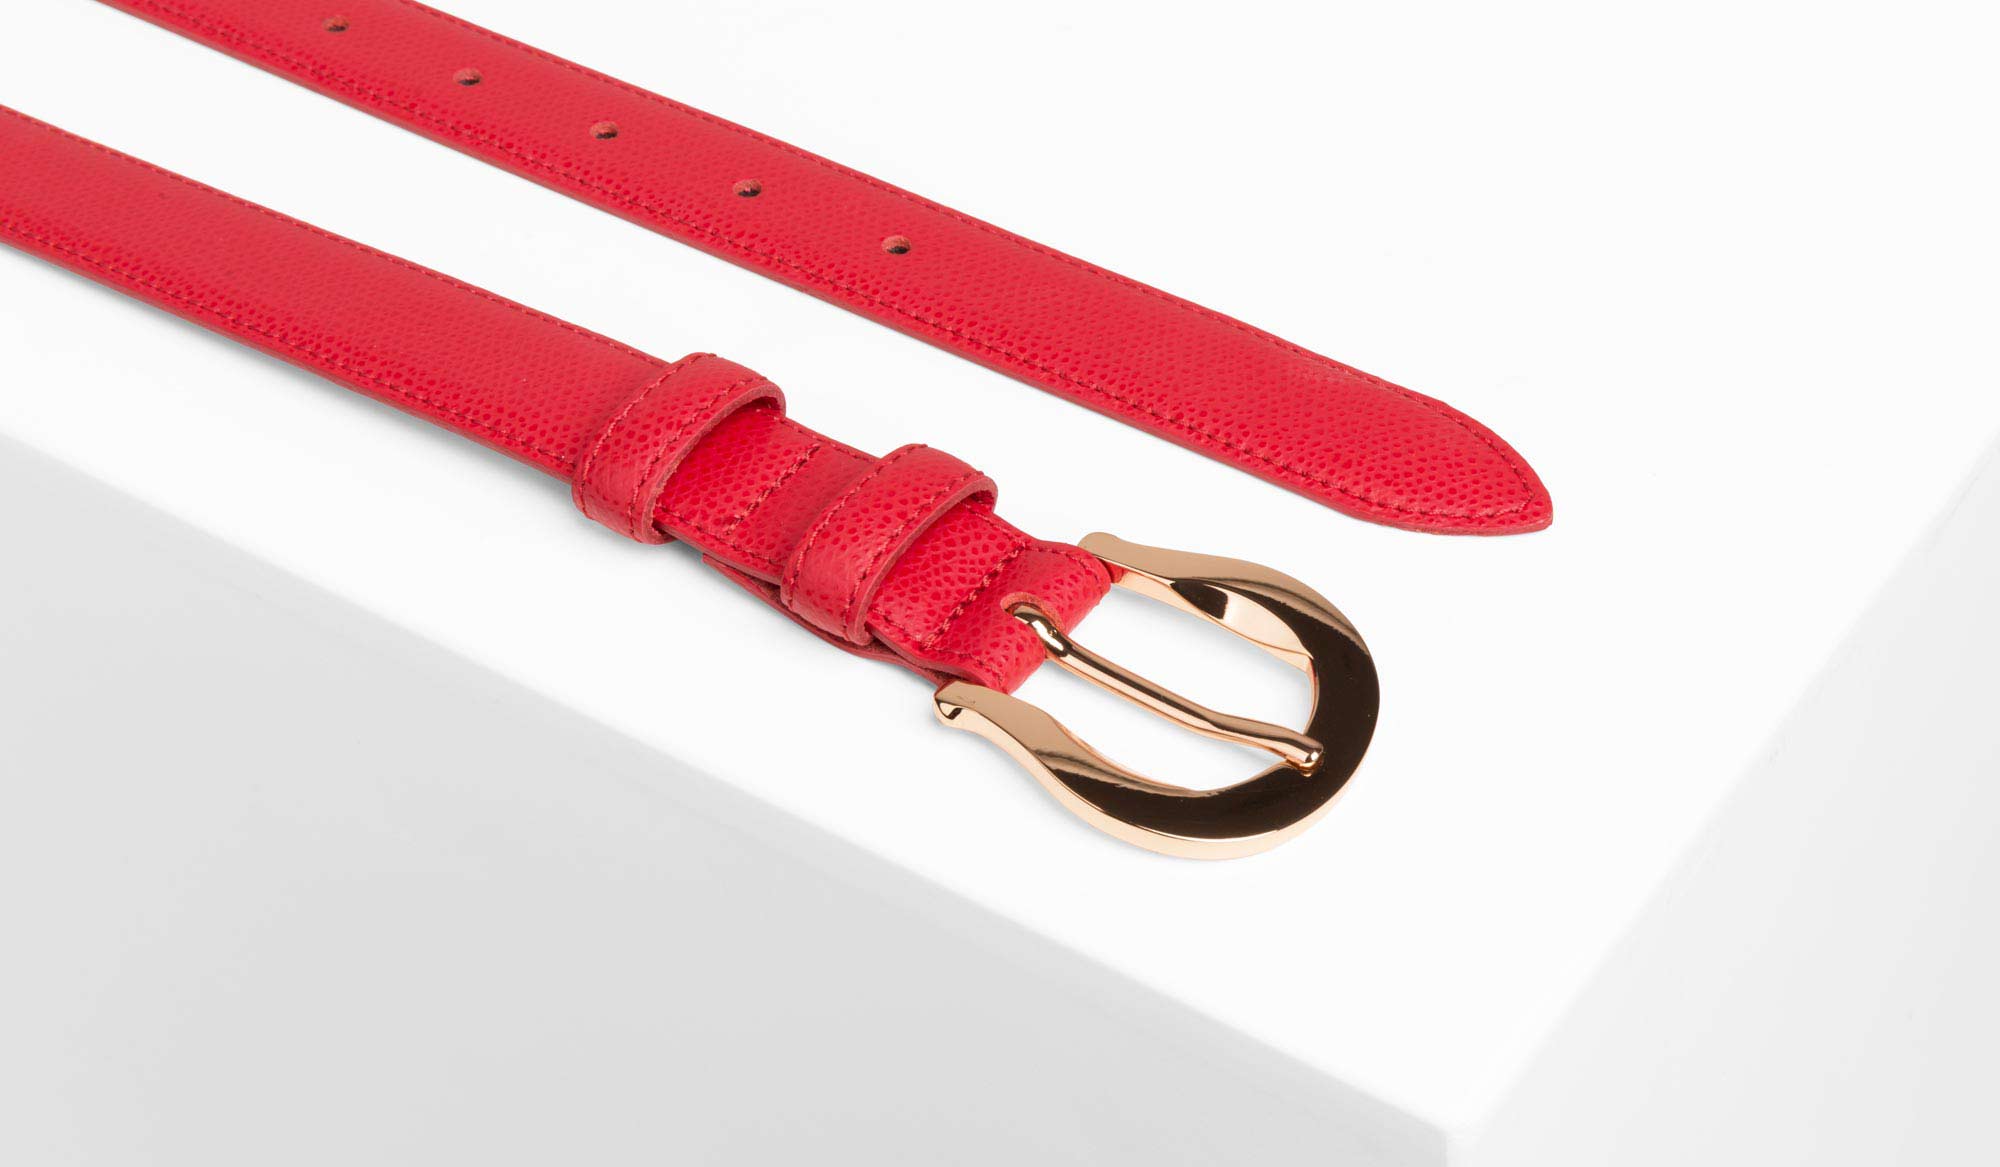 Red Palmellato leather belt with golden buckle